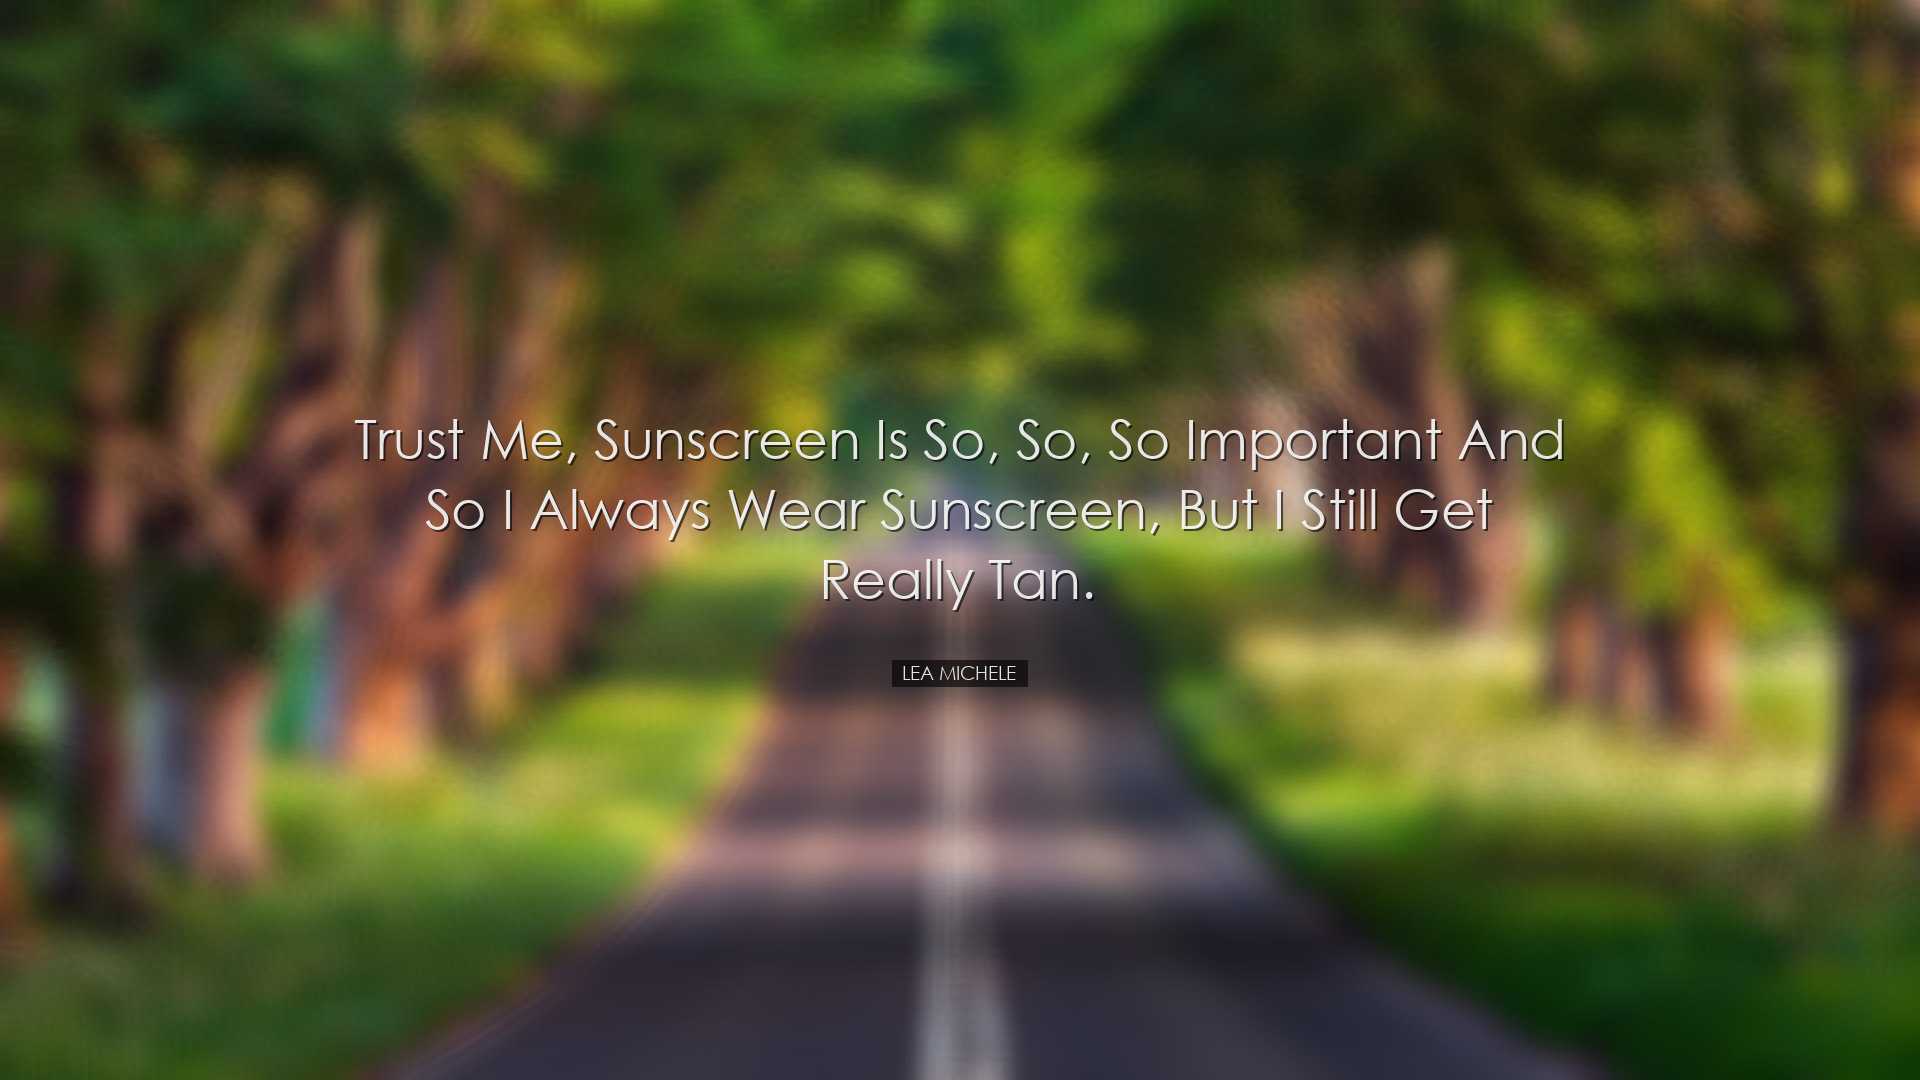 Trust me, sunscreen is so, so, so important and so I always wear s